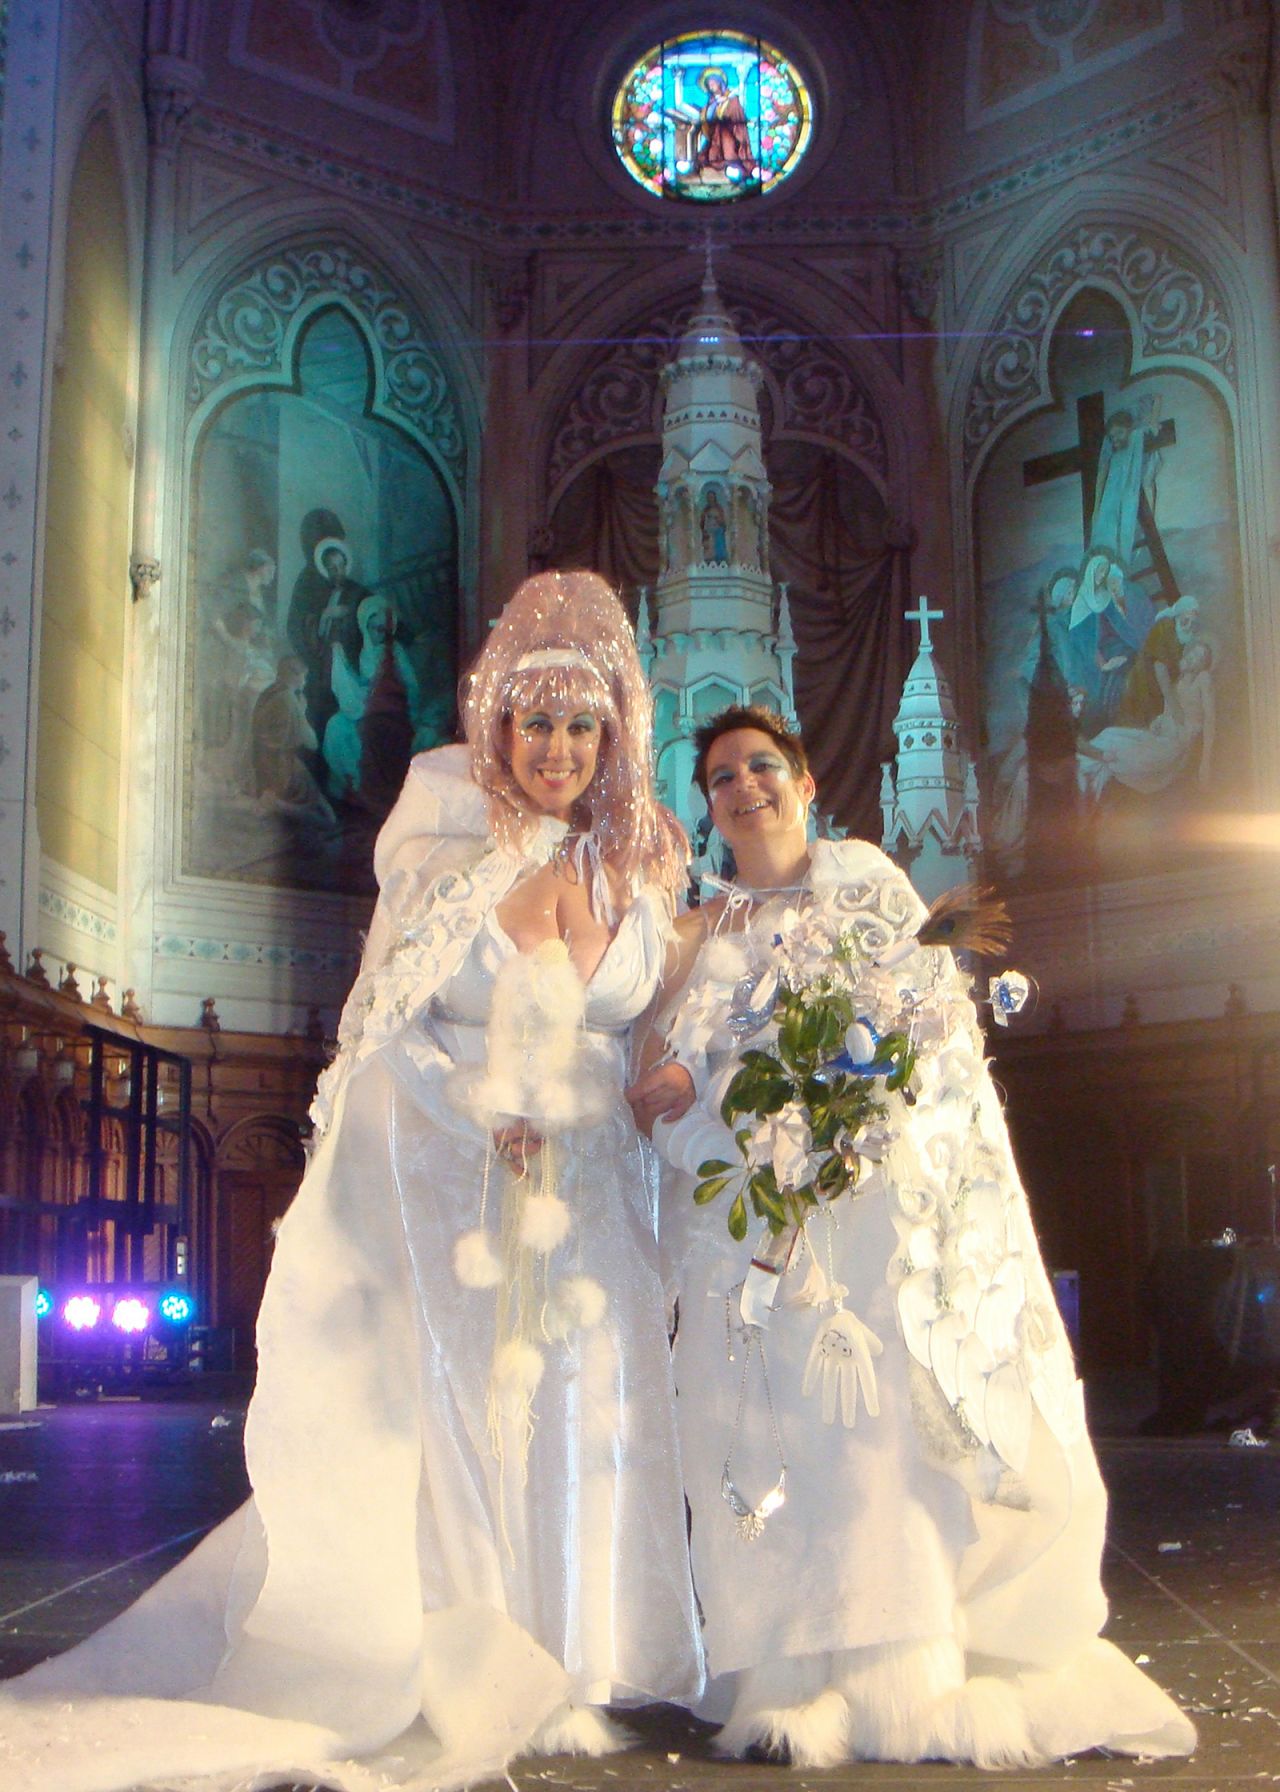 The White Wedding to Snow in Ottawa, Canada, was produced by SAW Gallery in a decommissioned Catholic cathedral.